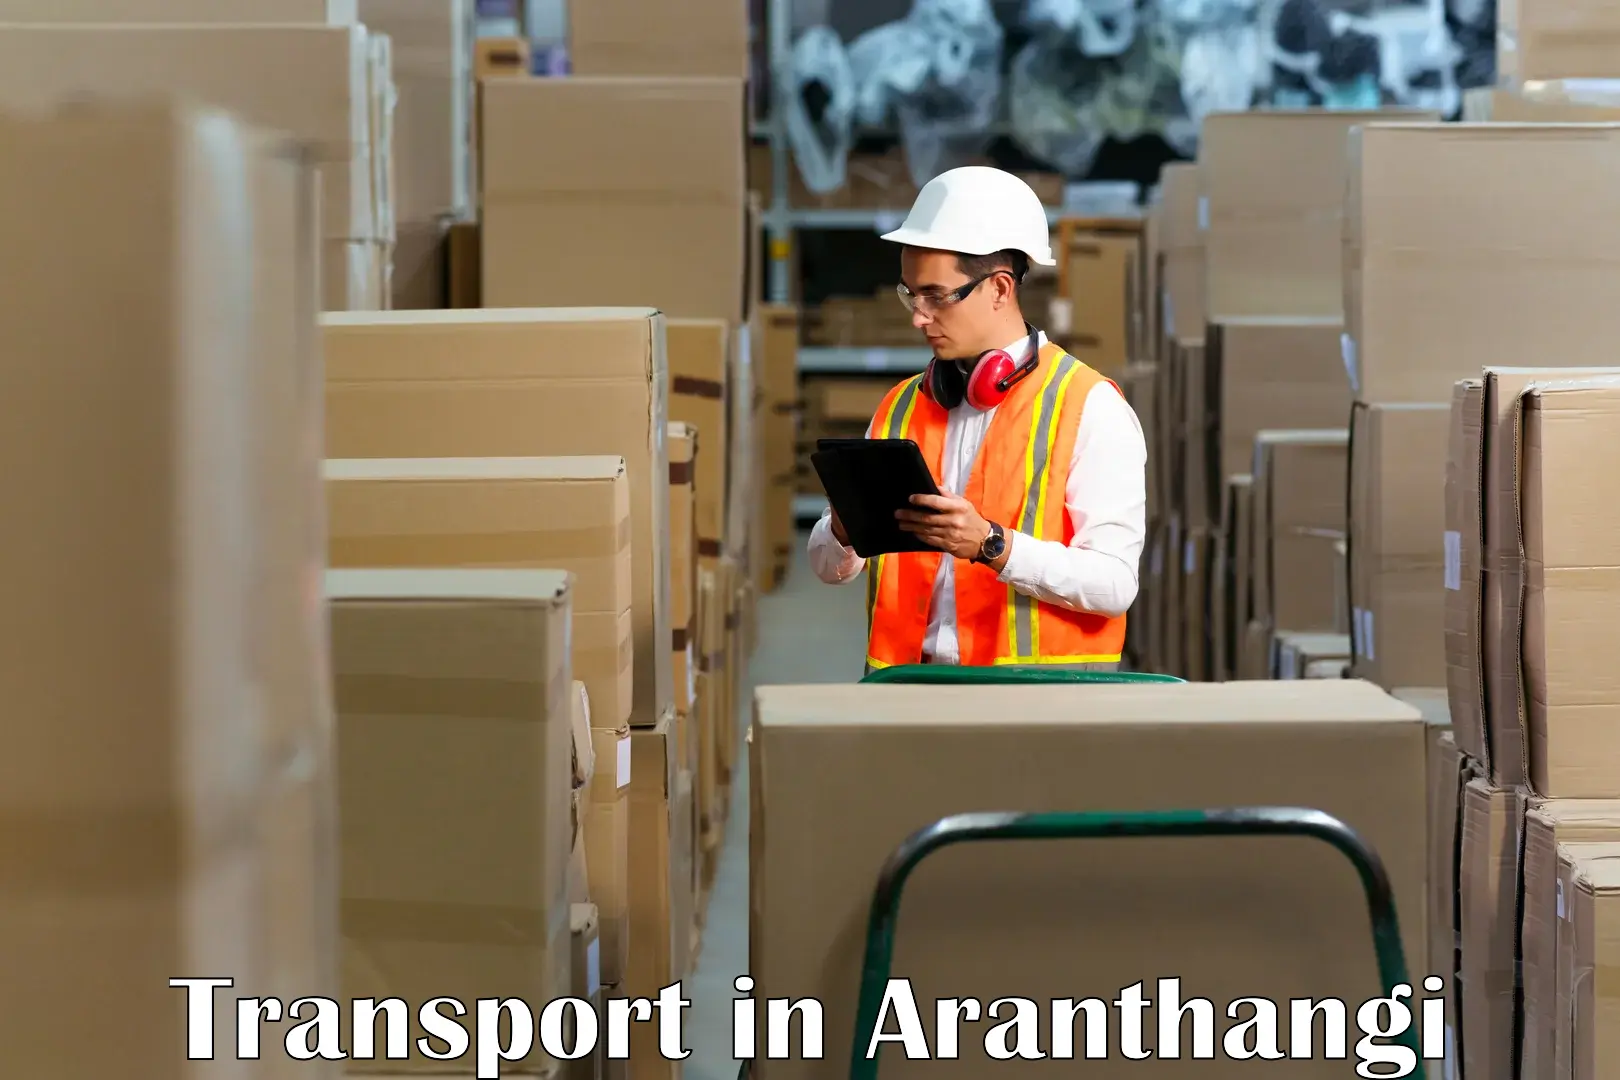 Goods delivery service in Aranthangi